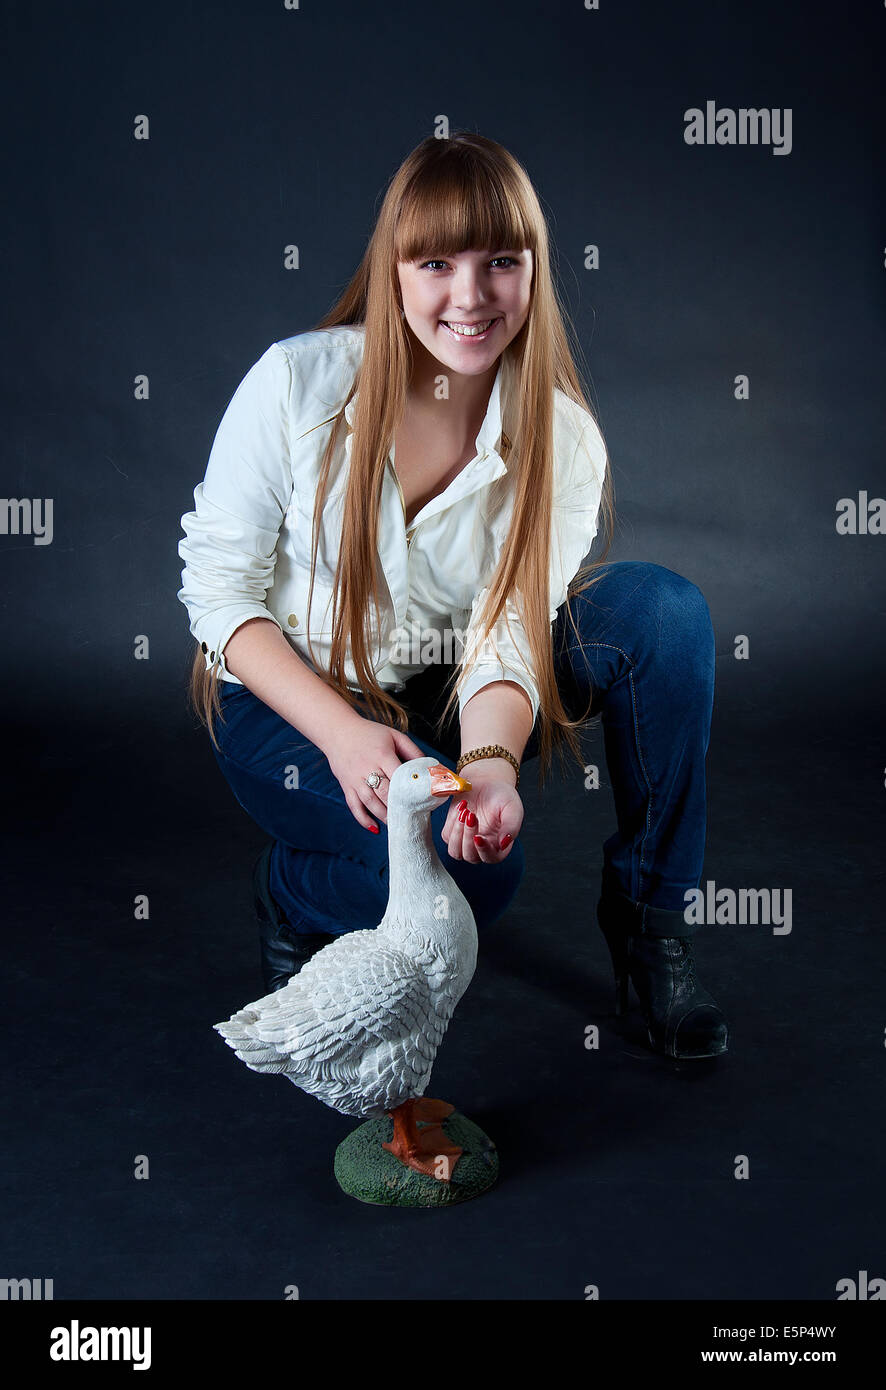 Beautiful caucasian girl with long blond hair wearing white jacket and blue jeans and feedenig the artificial goose Stock Photo